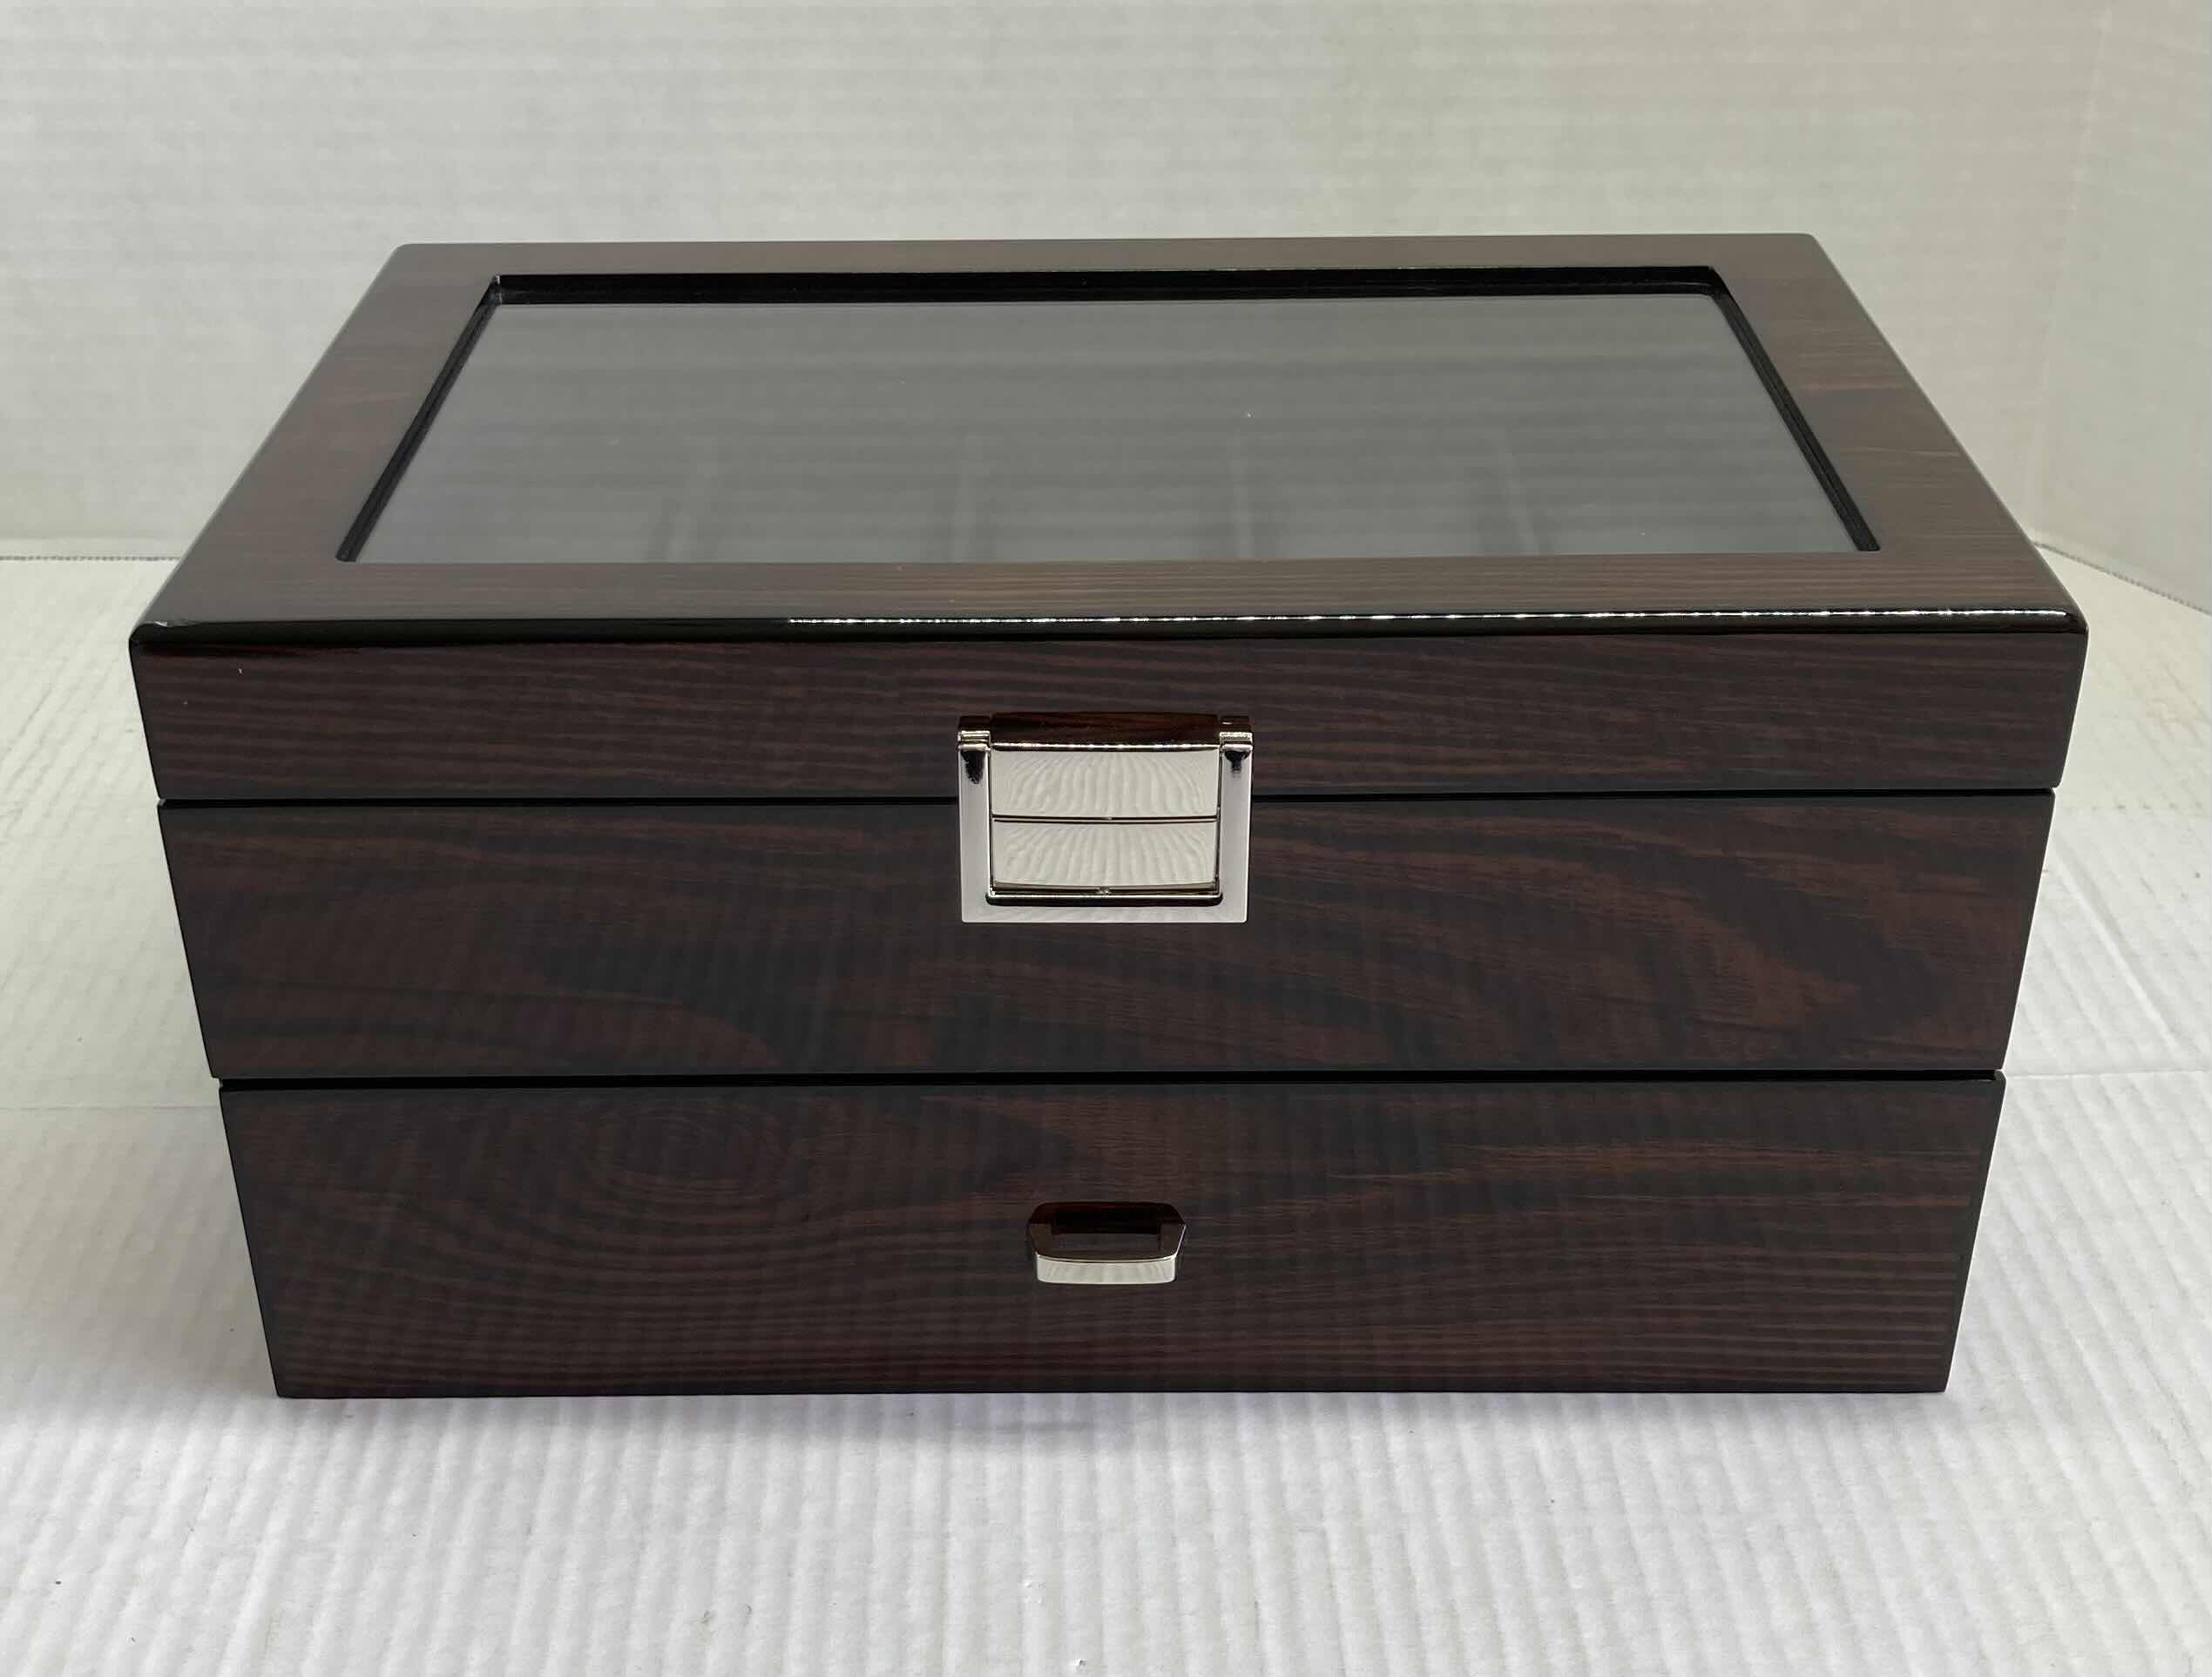 Photo 1 of NEW BROWN BEWISHOME WATCH BOX W GLASS TOP LEATHER INTERIOR 11.73” X 7.83” H5.59”